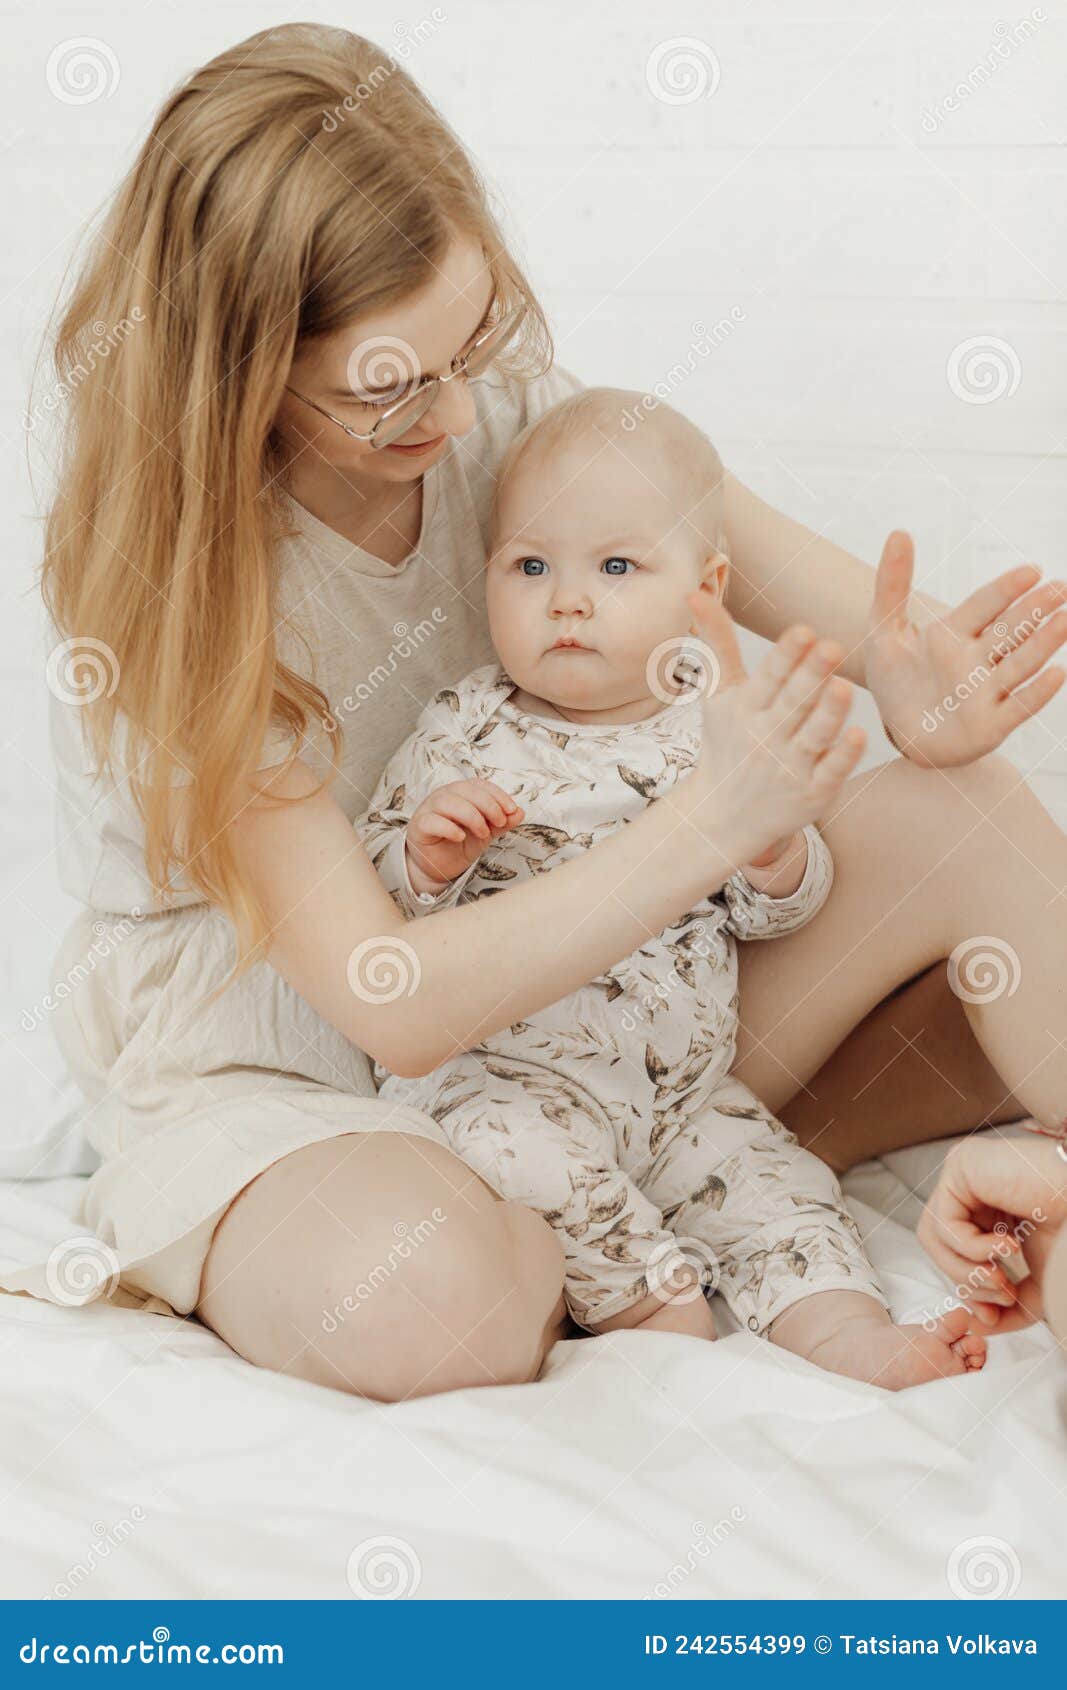 portrait of young happy smiling beautiful mother holding cute cherubic baby toddler in white clothe playing patty-cake.